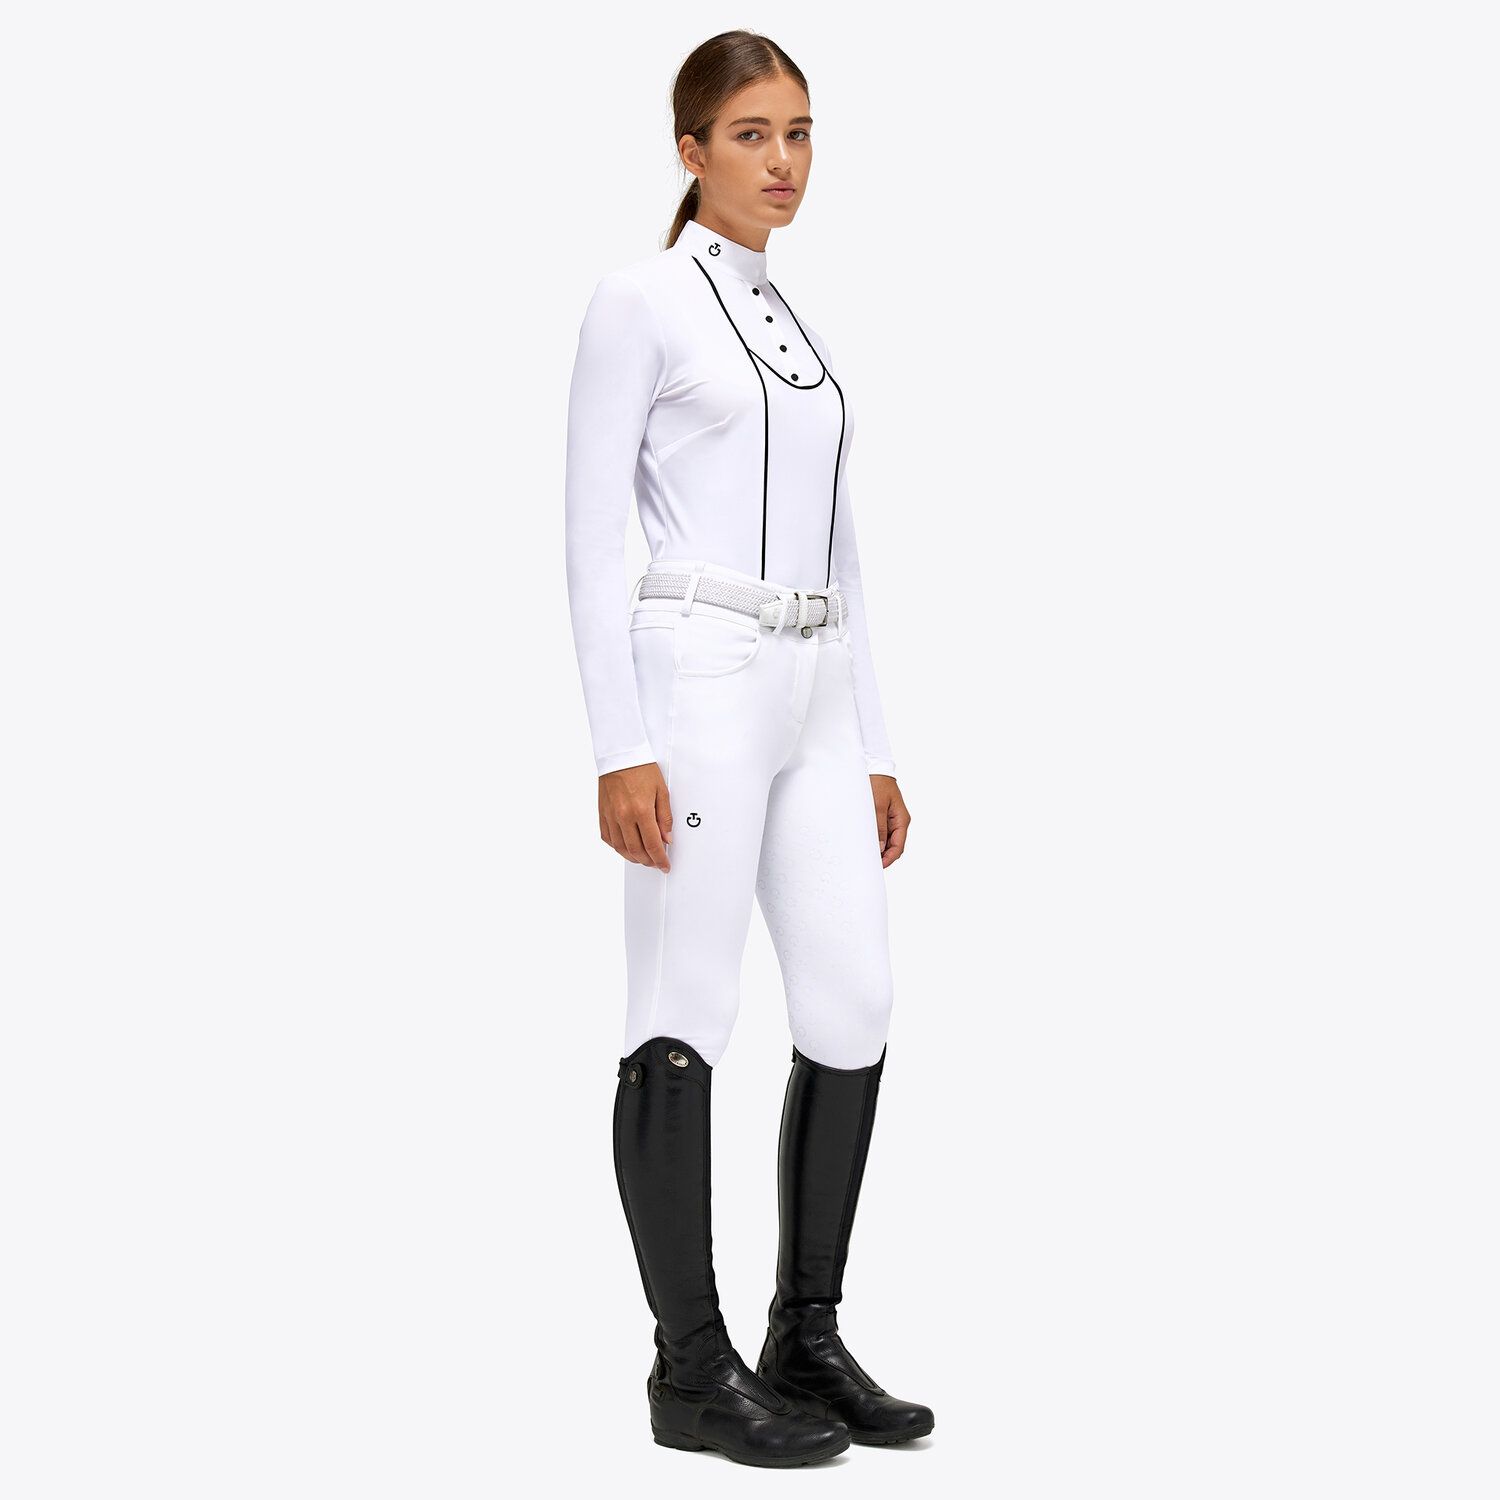 Cavalleria Toscana Women’s jersey show shirt with buttons WHITE-2